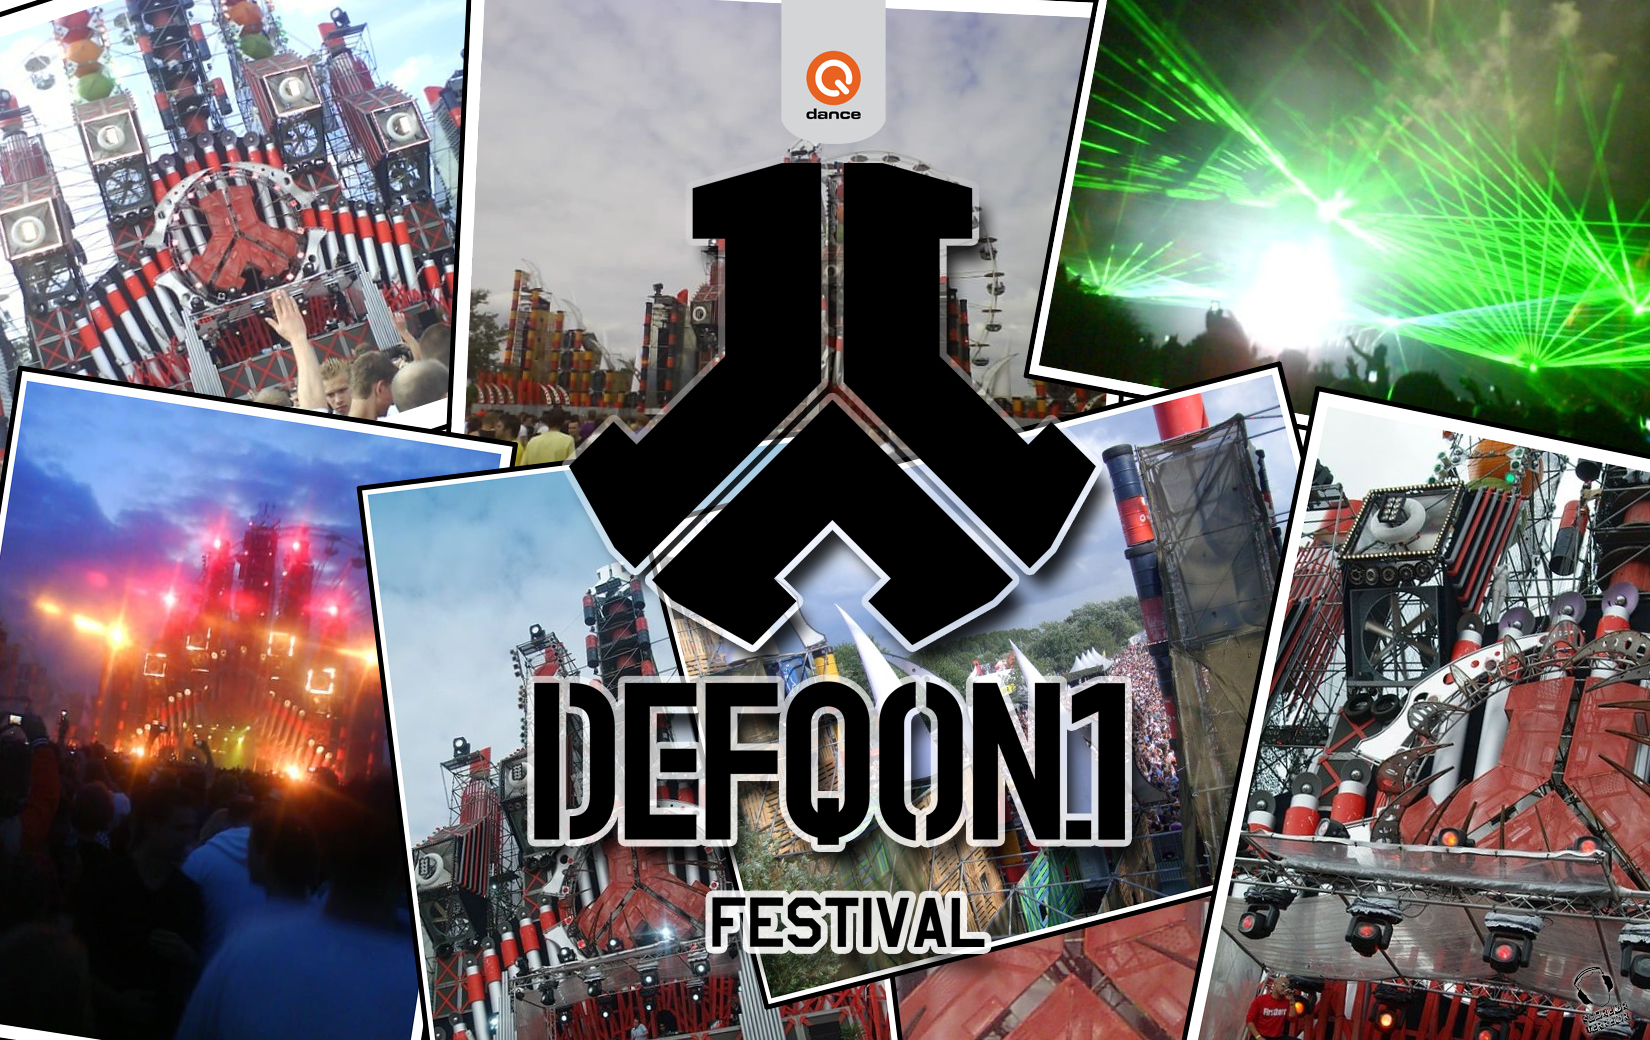 If You Want Defqon Festival Tickets For Then This Is The Place